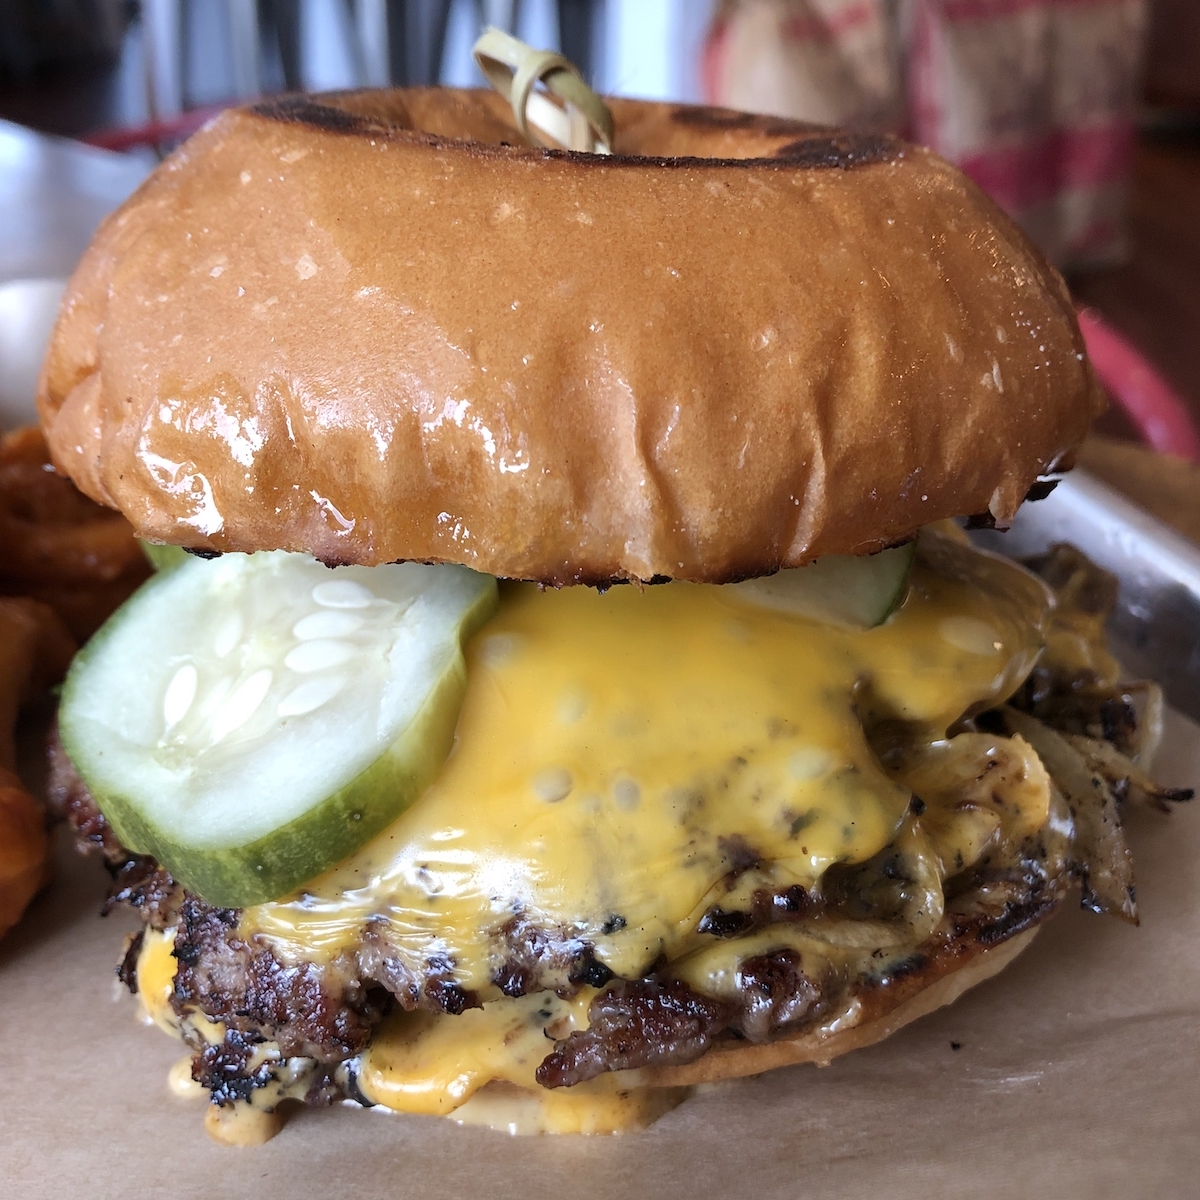 OK Onion Smash burger from Swine and Sons in Orlando, Florida